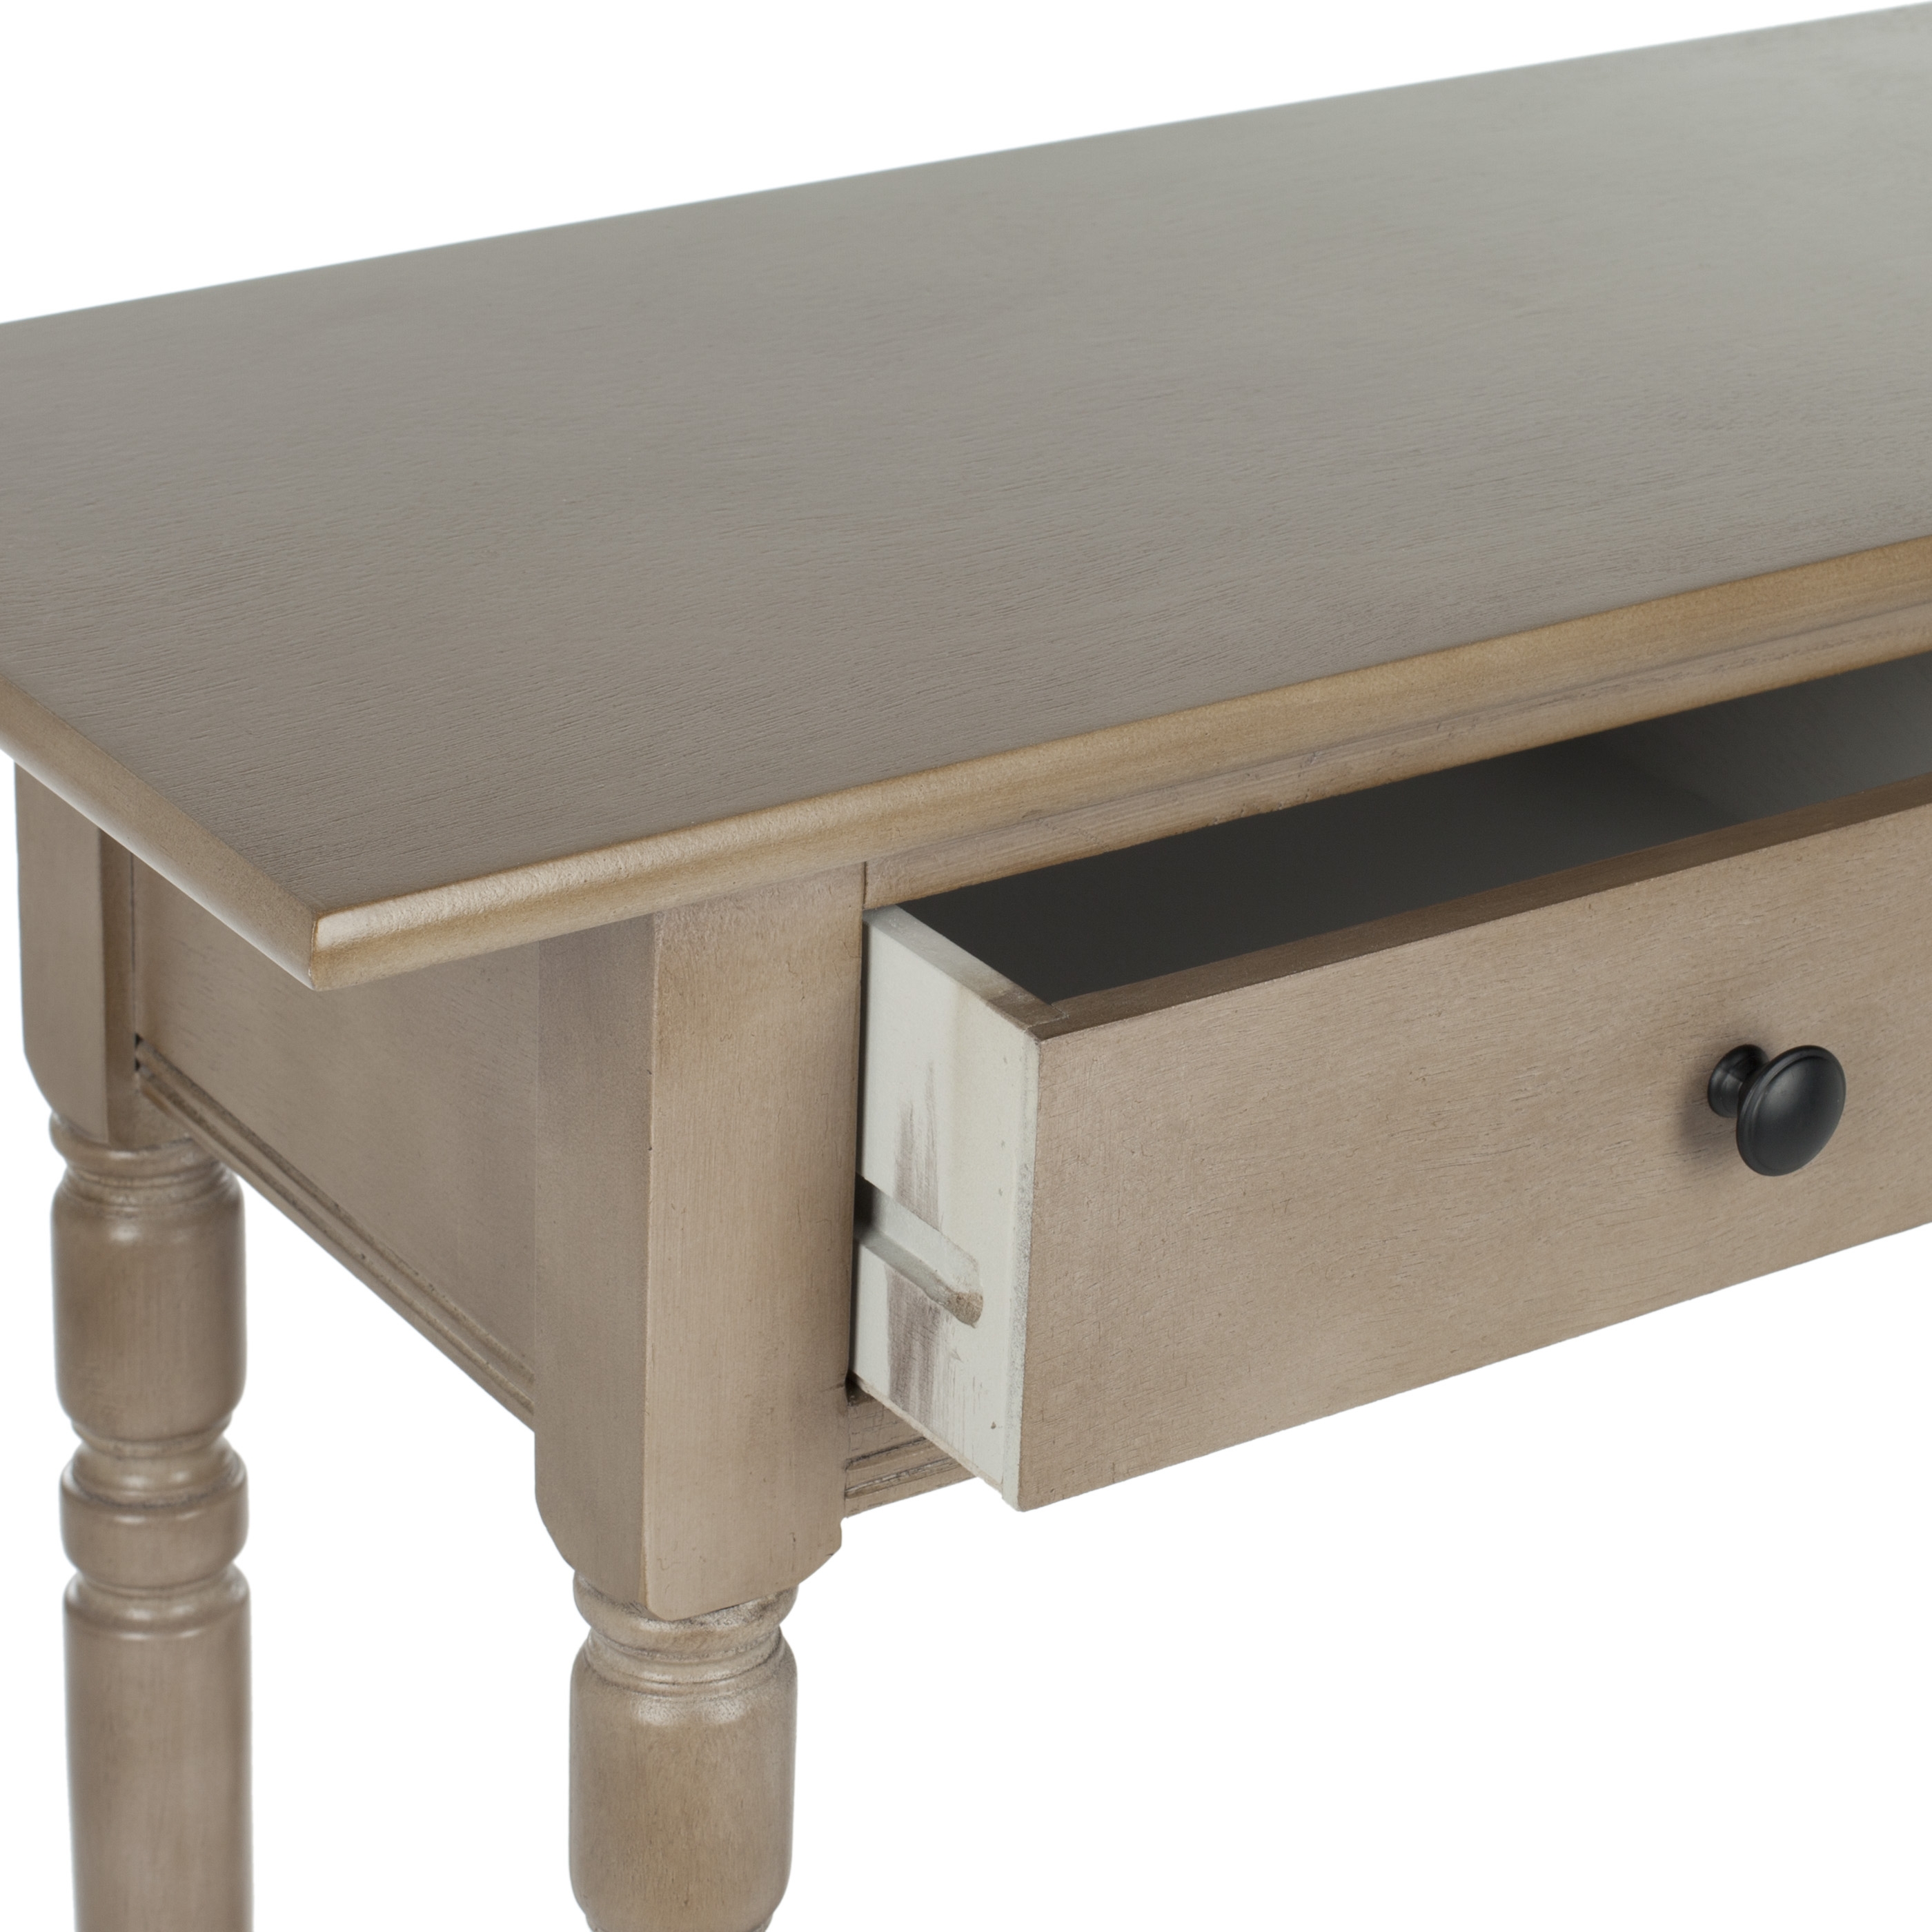 Rosemary 2 Drawer Console - Vintage Grey - Arlo Home - Image 1